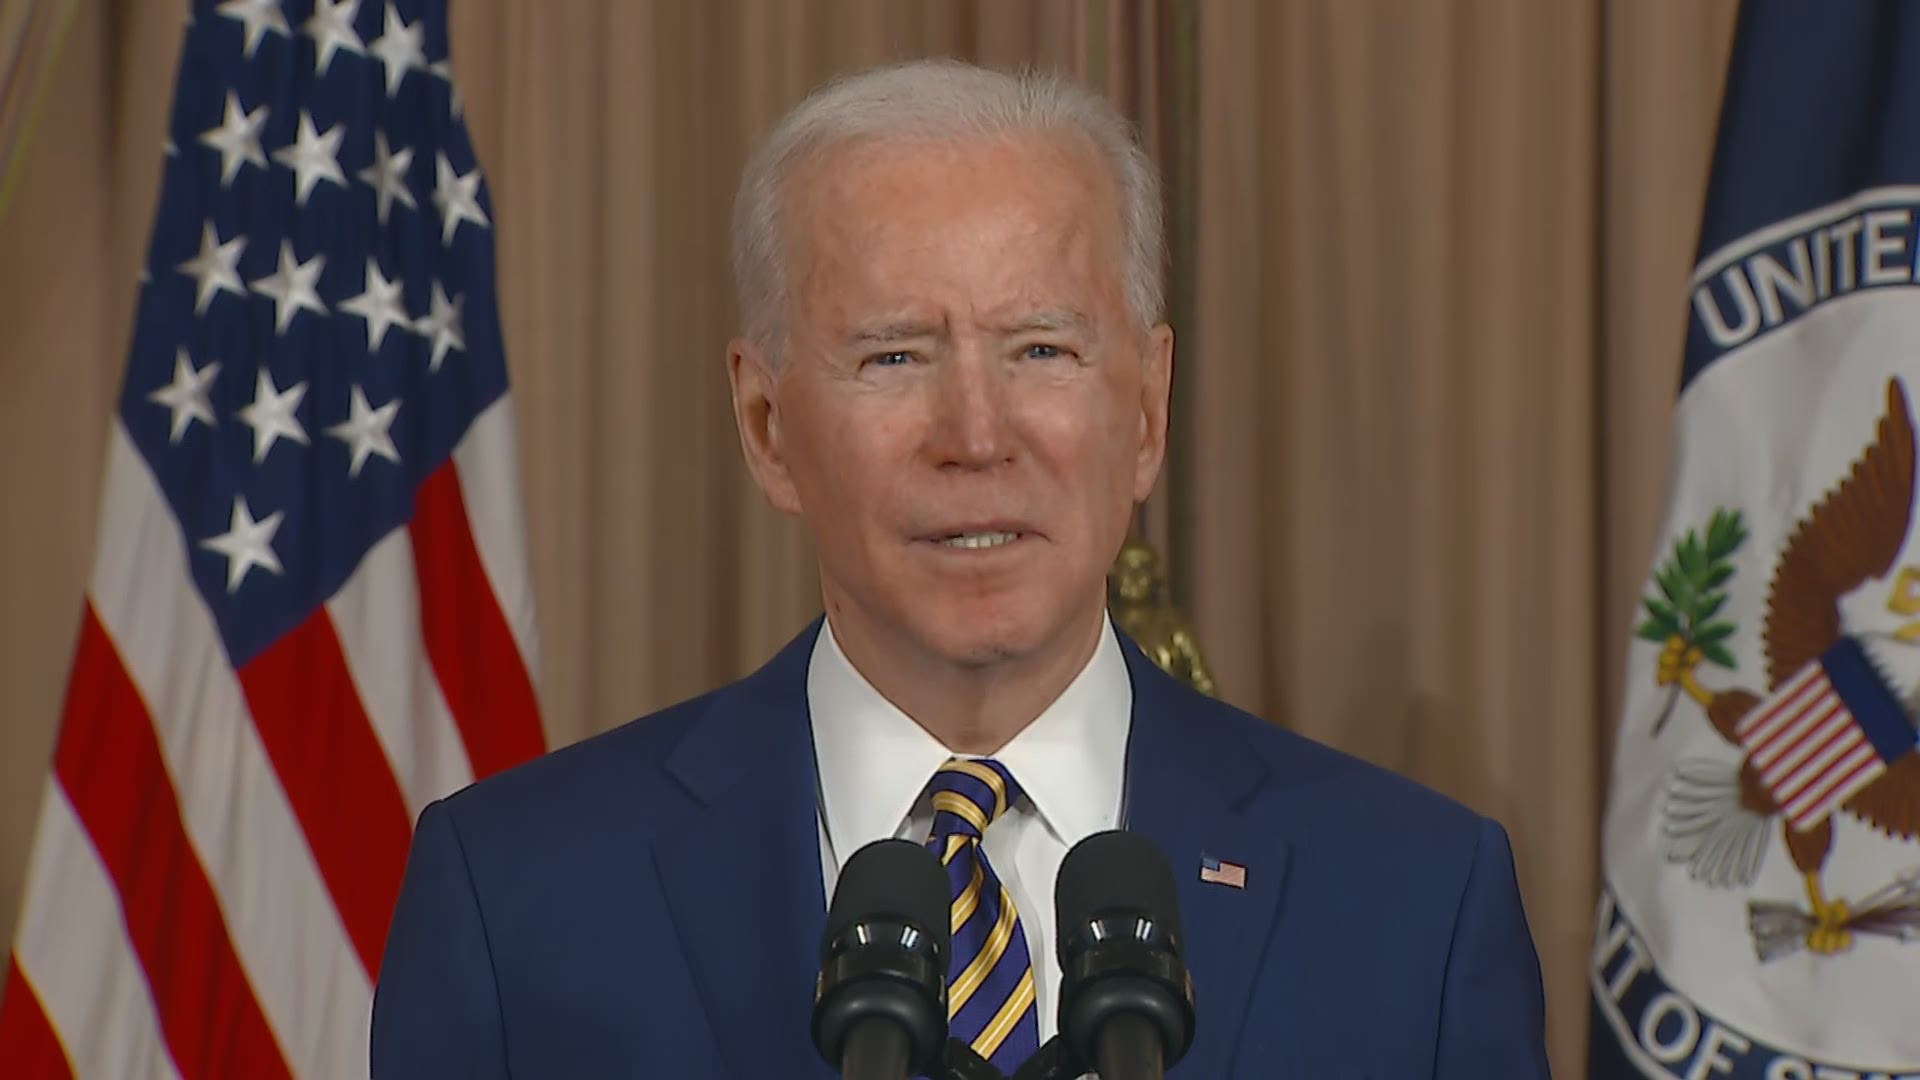 Biden is also naming a longtime U.S. diplomat for the Middle East as special envoy to Yemen, as his administration seeks a diplomatic end to the war.